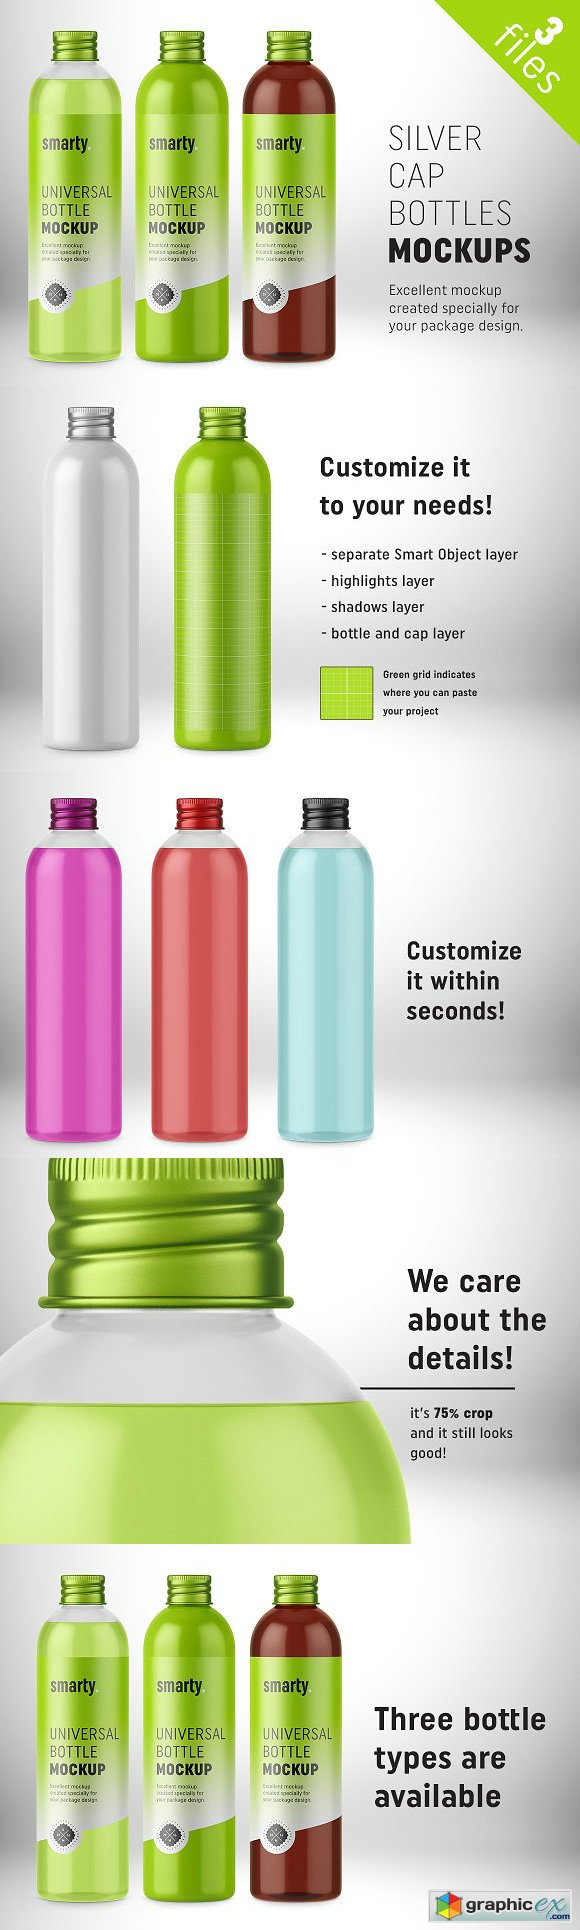 Bottles with Silver Cap Mockup 2035043